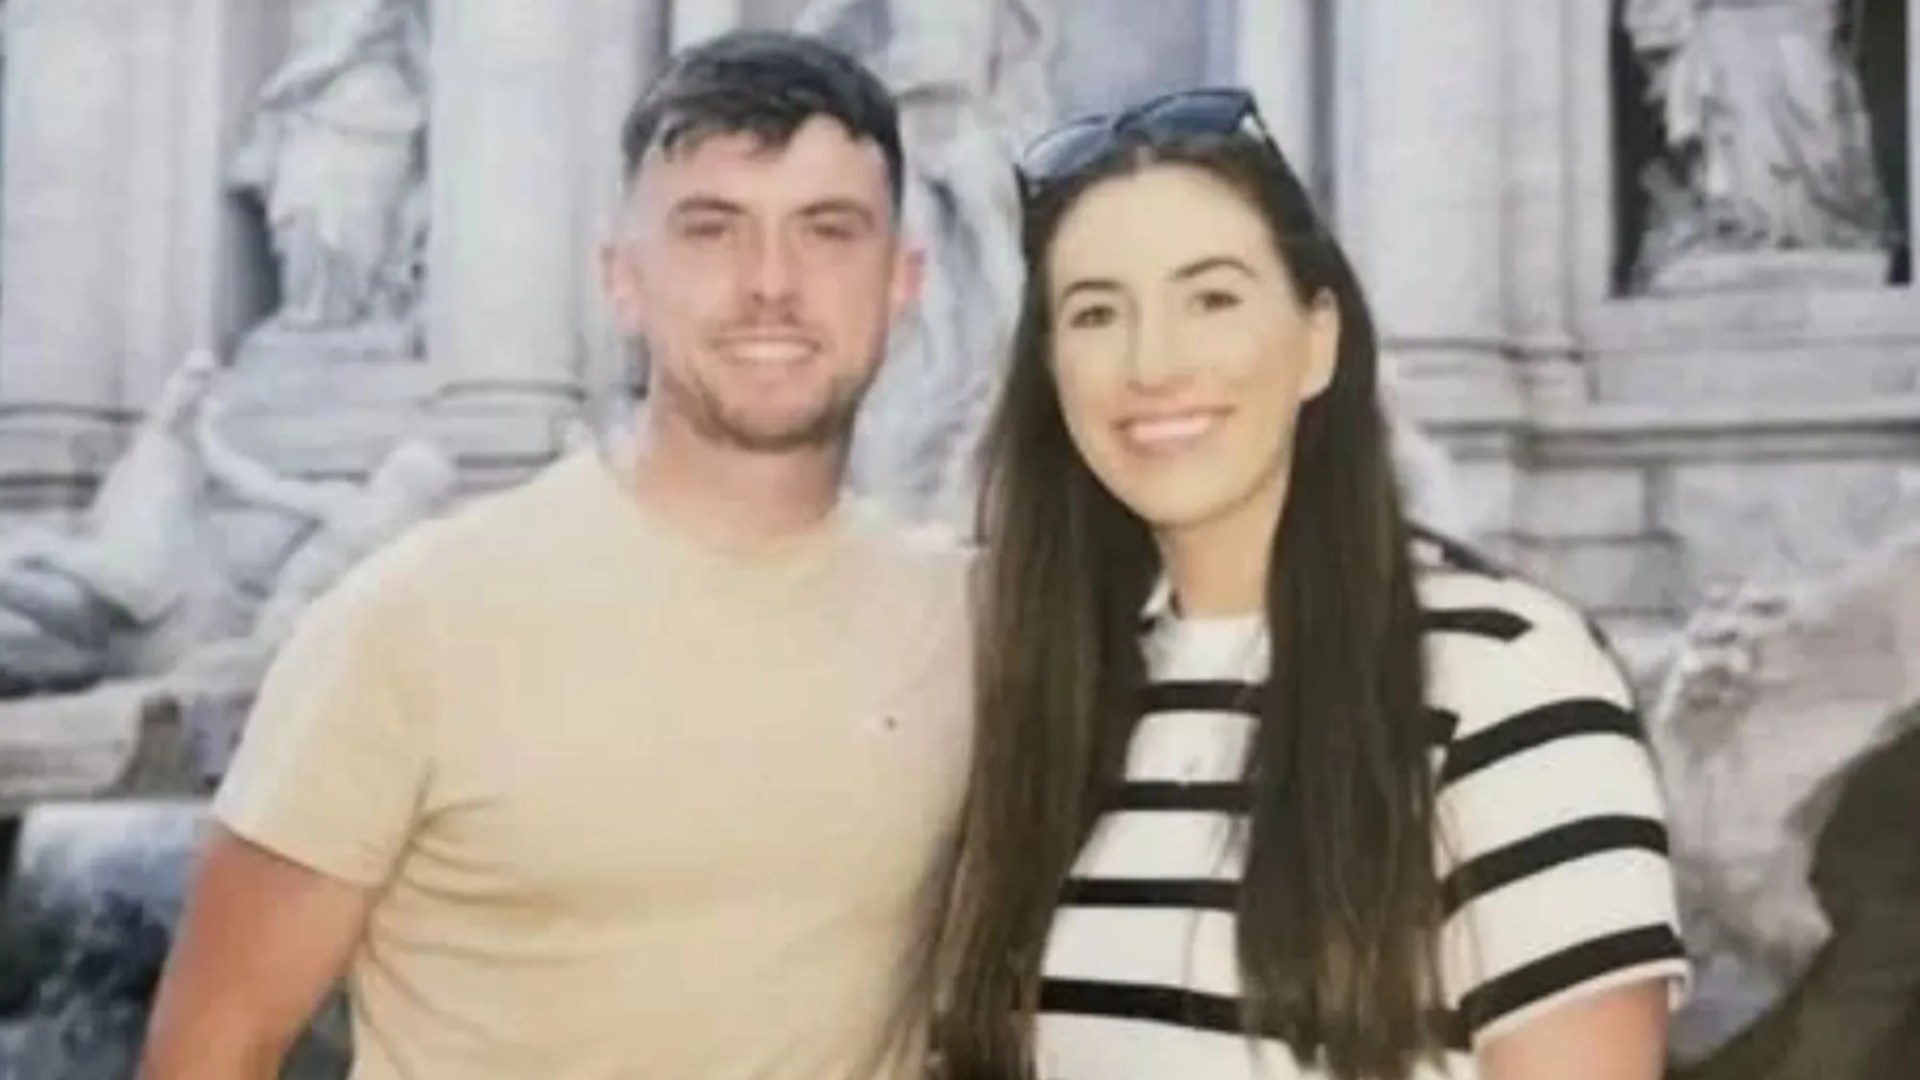 Carlow man who suffered life-changing injuries in Rome accident returns home to Ireland for treatment [Video]